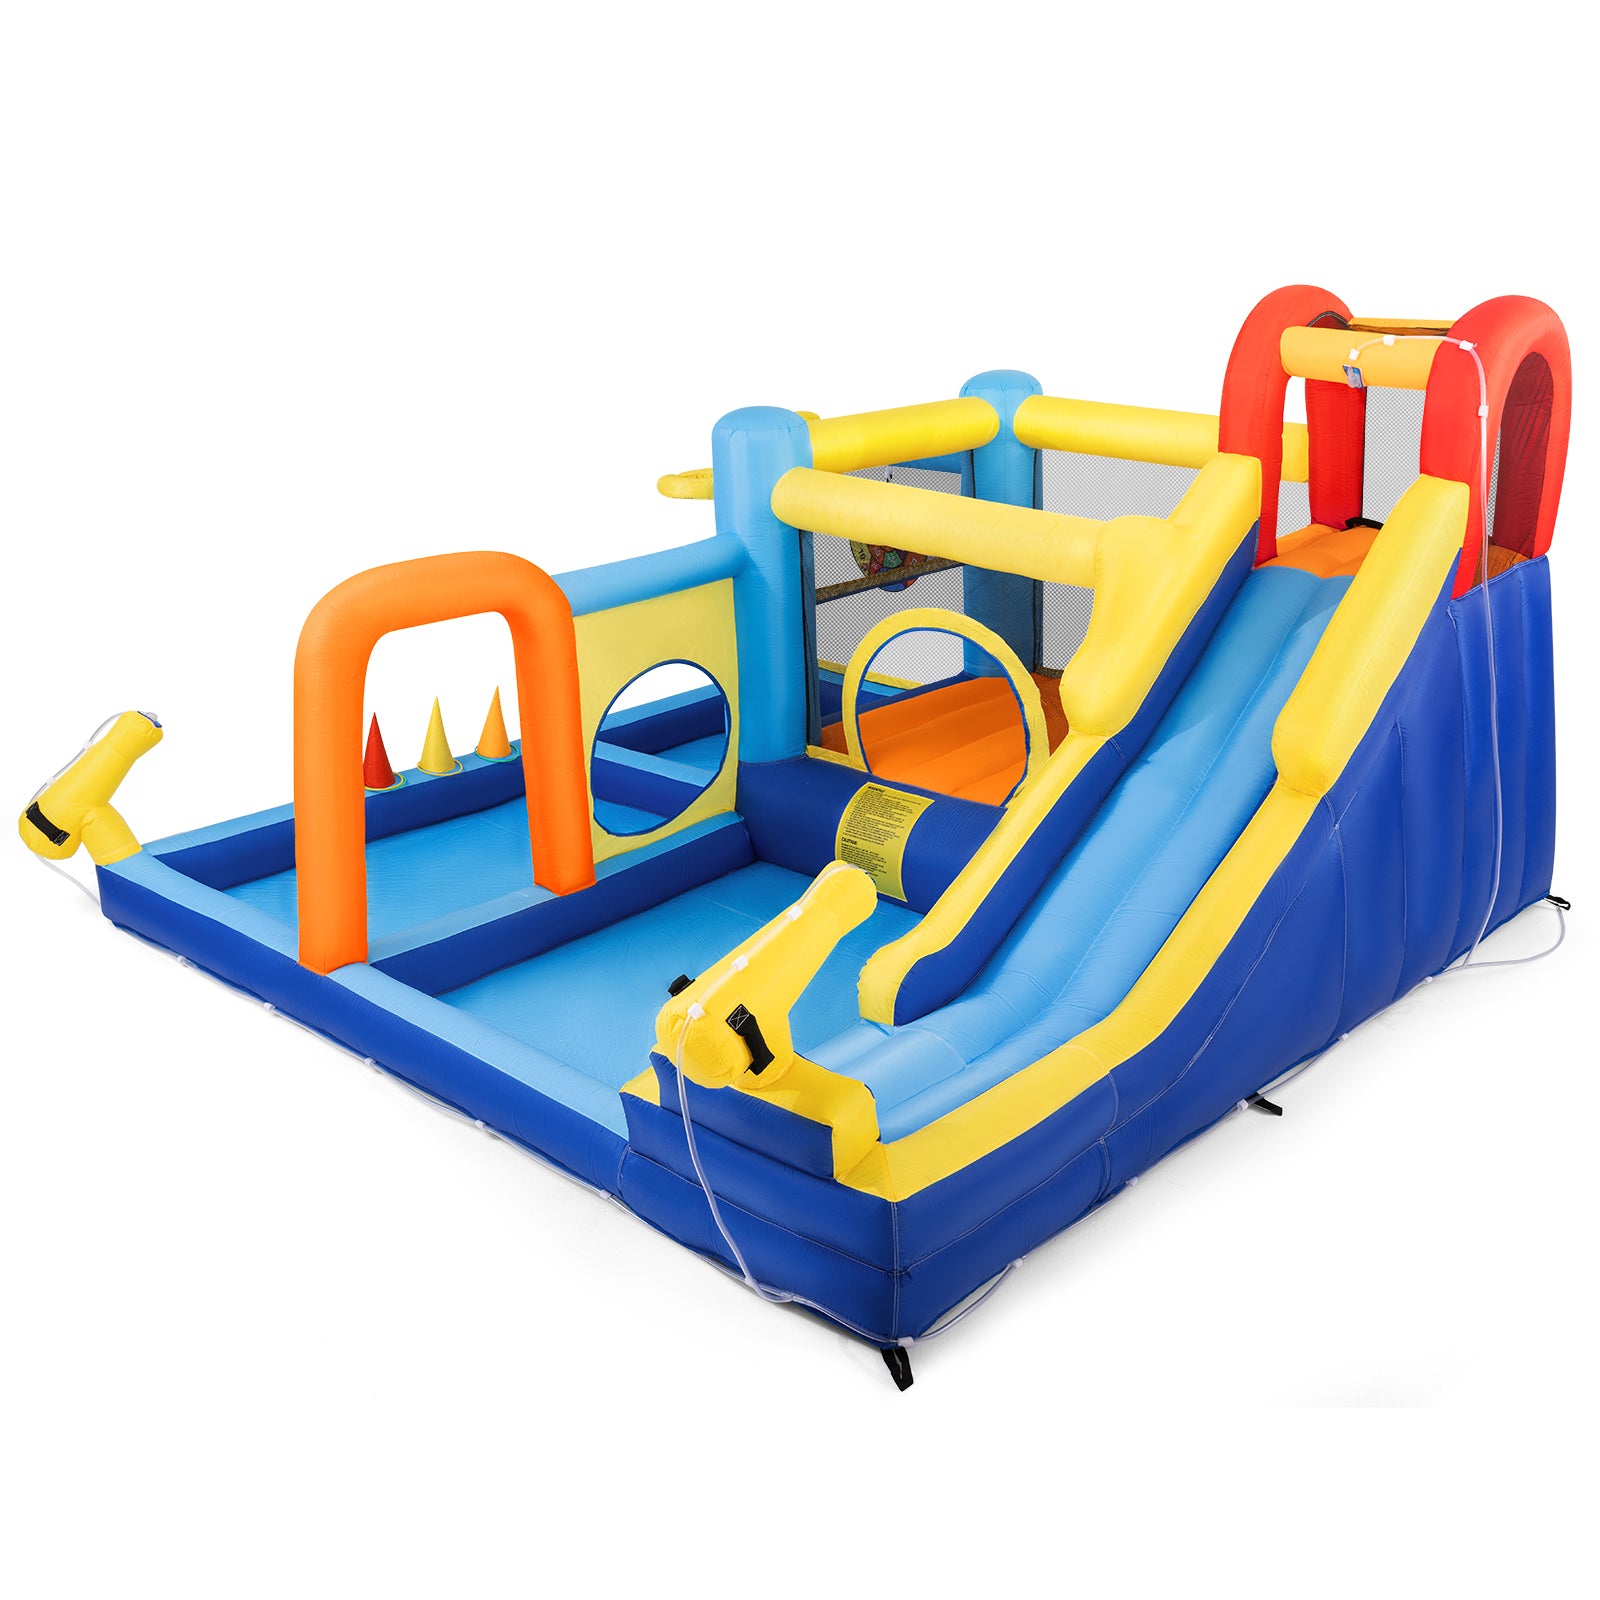 #1203 Inflatable Water Slide,Water Park Bounce House,Slide Bouncer Castle Playhouse w/Splash Pool, Climbing Wall, Trampoline，Felt Ball Target, Ring Toss Game for Kids Outdoor Fun, 550W Air Blower